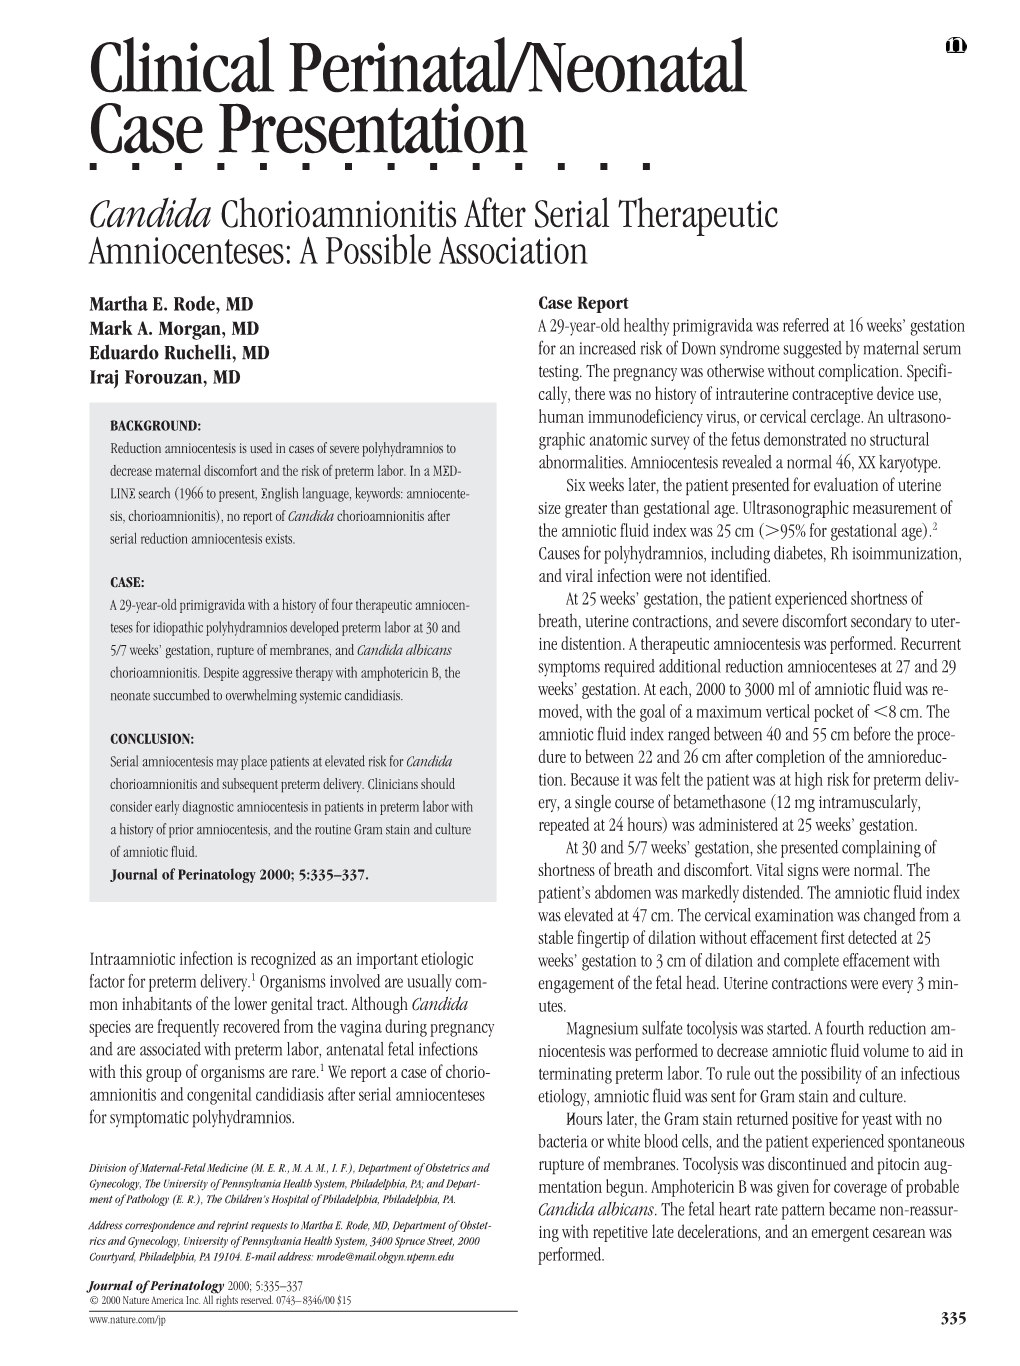 Clinical Perinatal/Neonatal Case Presentation ⅢⅢⅢⅢⅢⅢⅢⅢⅢⅢⅢⅢⅢⅢ Candida Chorioamnionitis After Serial Therapeutic Amniocenteses: a Possible Association